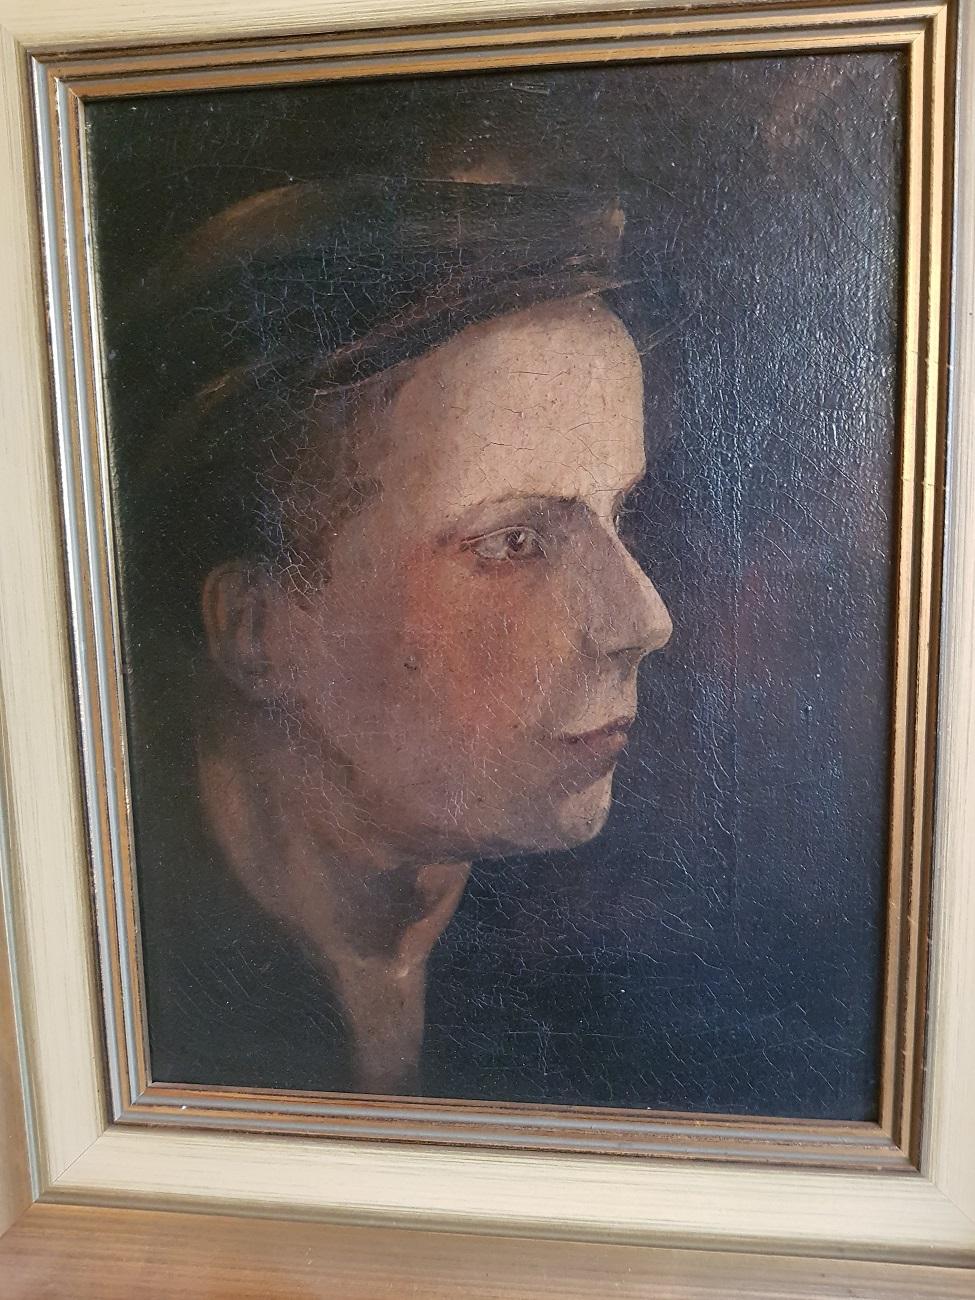 Elegant hand painted Impressionistic work by an unknown artist with a portrait of a boy with a cap, it is an oil on canvas from the late 19th century.

The measurements are incl. frame,
Depth 5 cm/ 1.9 inch.
Width 32.5 cm/ 12.7 inch.
Height 39 cm/